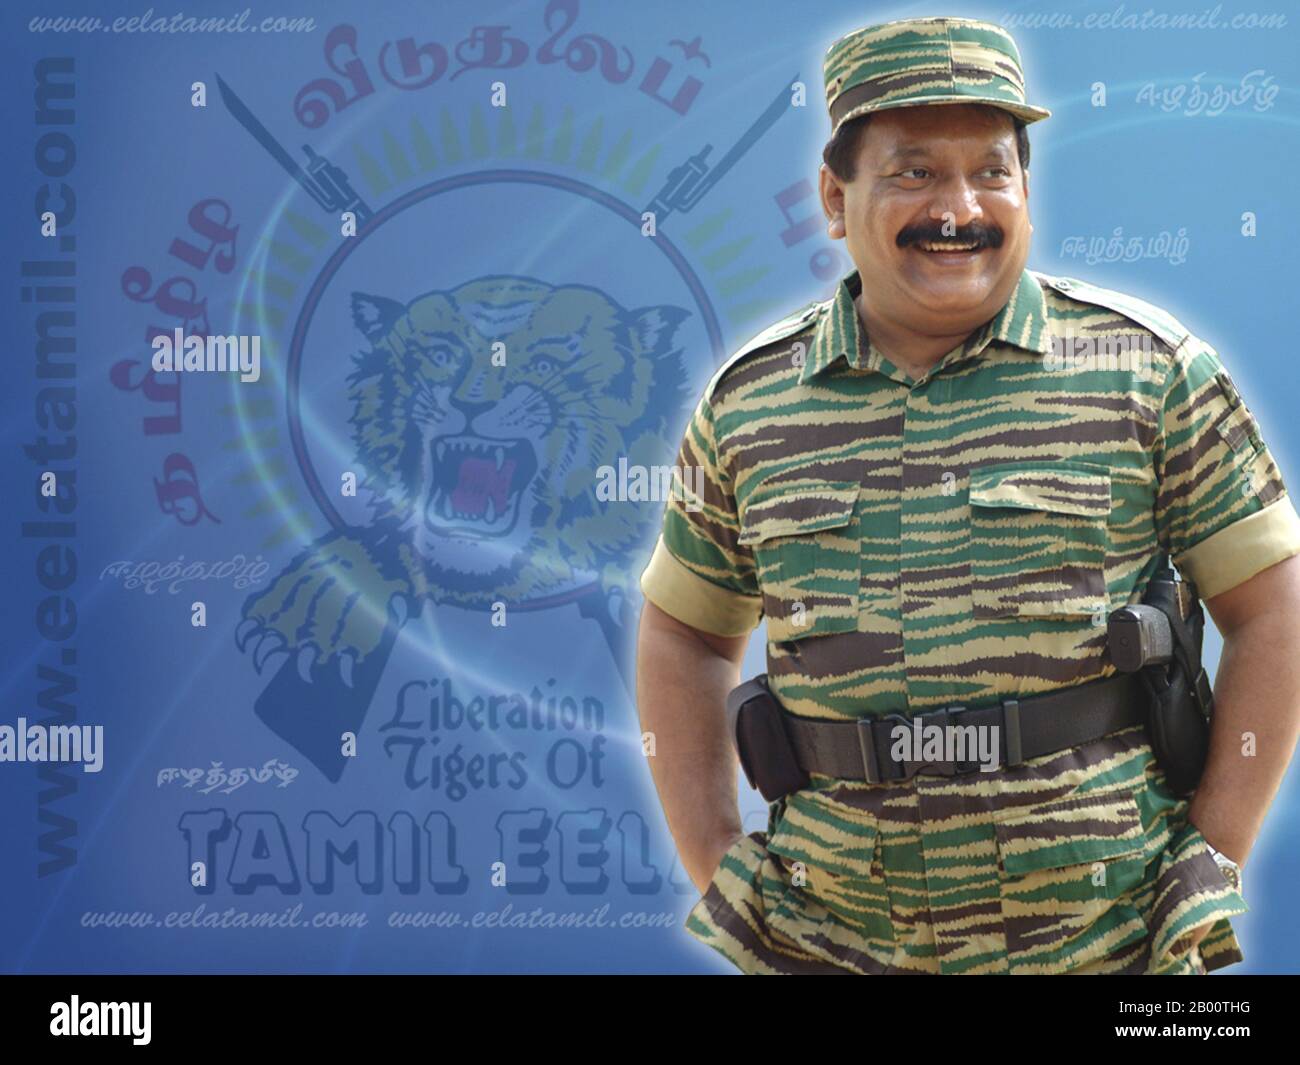 Sri Lanka: Vellupillai Prabhakaran (1954-2009), founder and leader of the Liberation Tigers of Tamil Eelam (LTTE).  The Liberation Tigers of Tamil Eelam, commonly known as the LTTE or the Tamil Tigers, is a separatist organization formerly based in northern Sri Lanka. Founded in May 1976 by Velupillai Prabhakaran, it waged a violent secessionist campaign that sought to create Tamil Eelam, an independent state in the north and east of Sri Lanka. This campaign evolved into the Sri Lankan Civil War, which was one of the longest running armed conflicts in Asia until the LTTE was defeated in 2009. Stock Photo